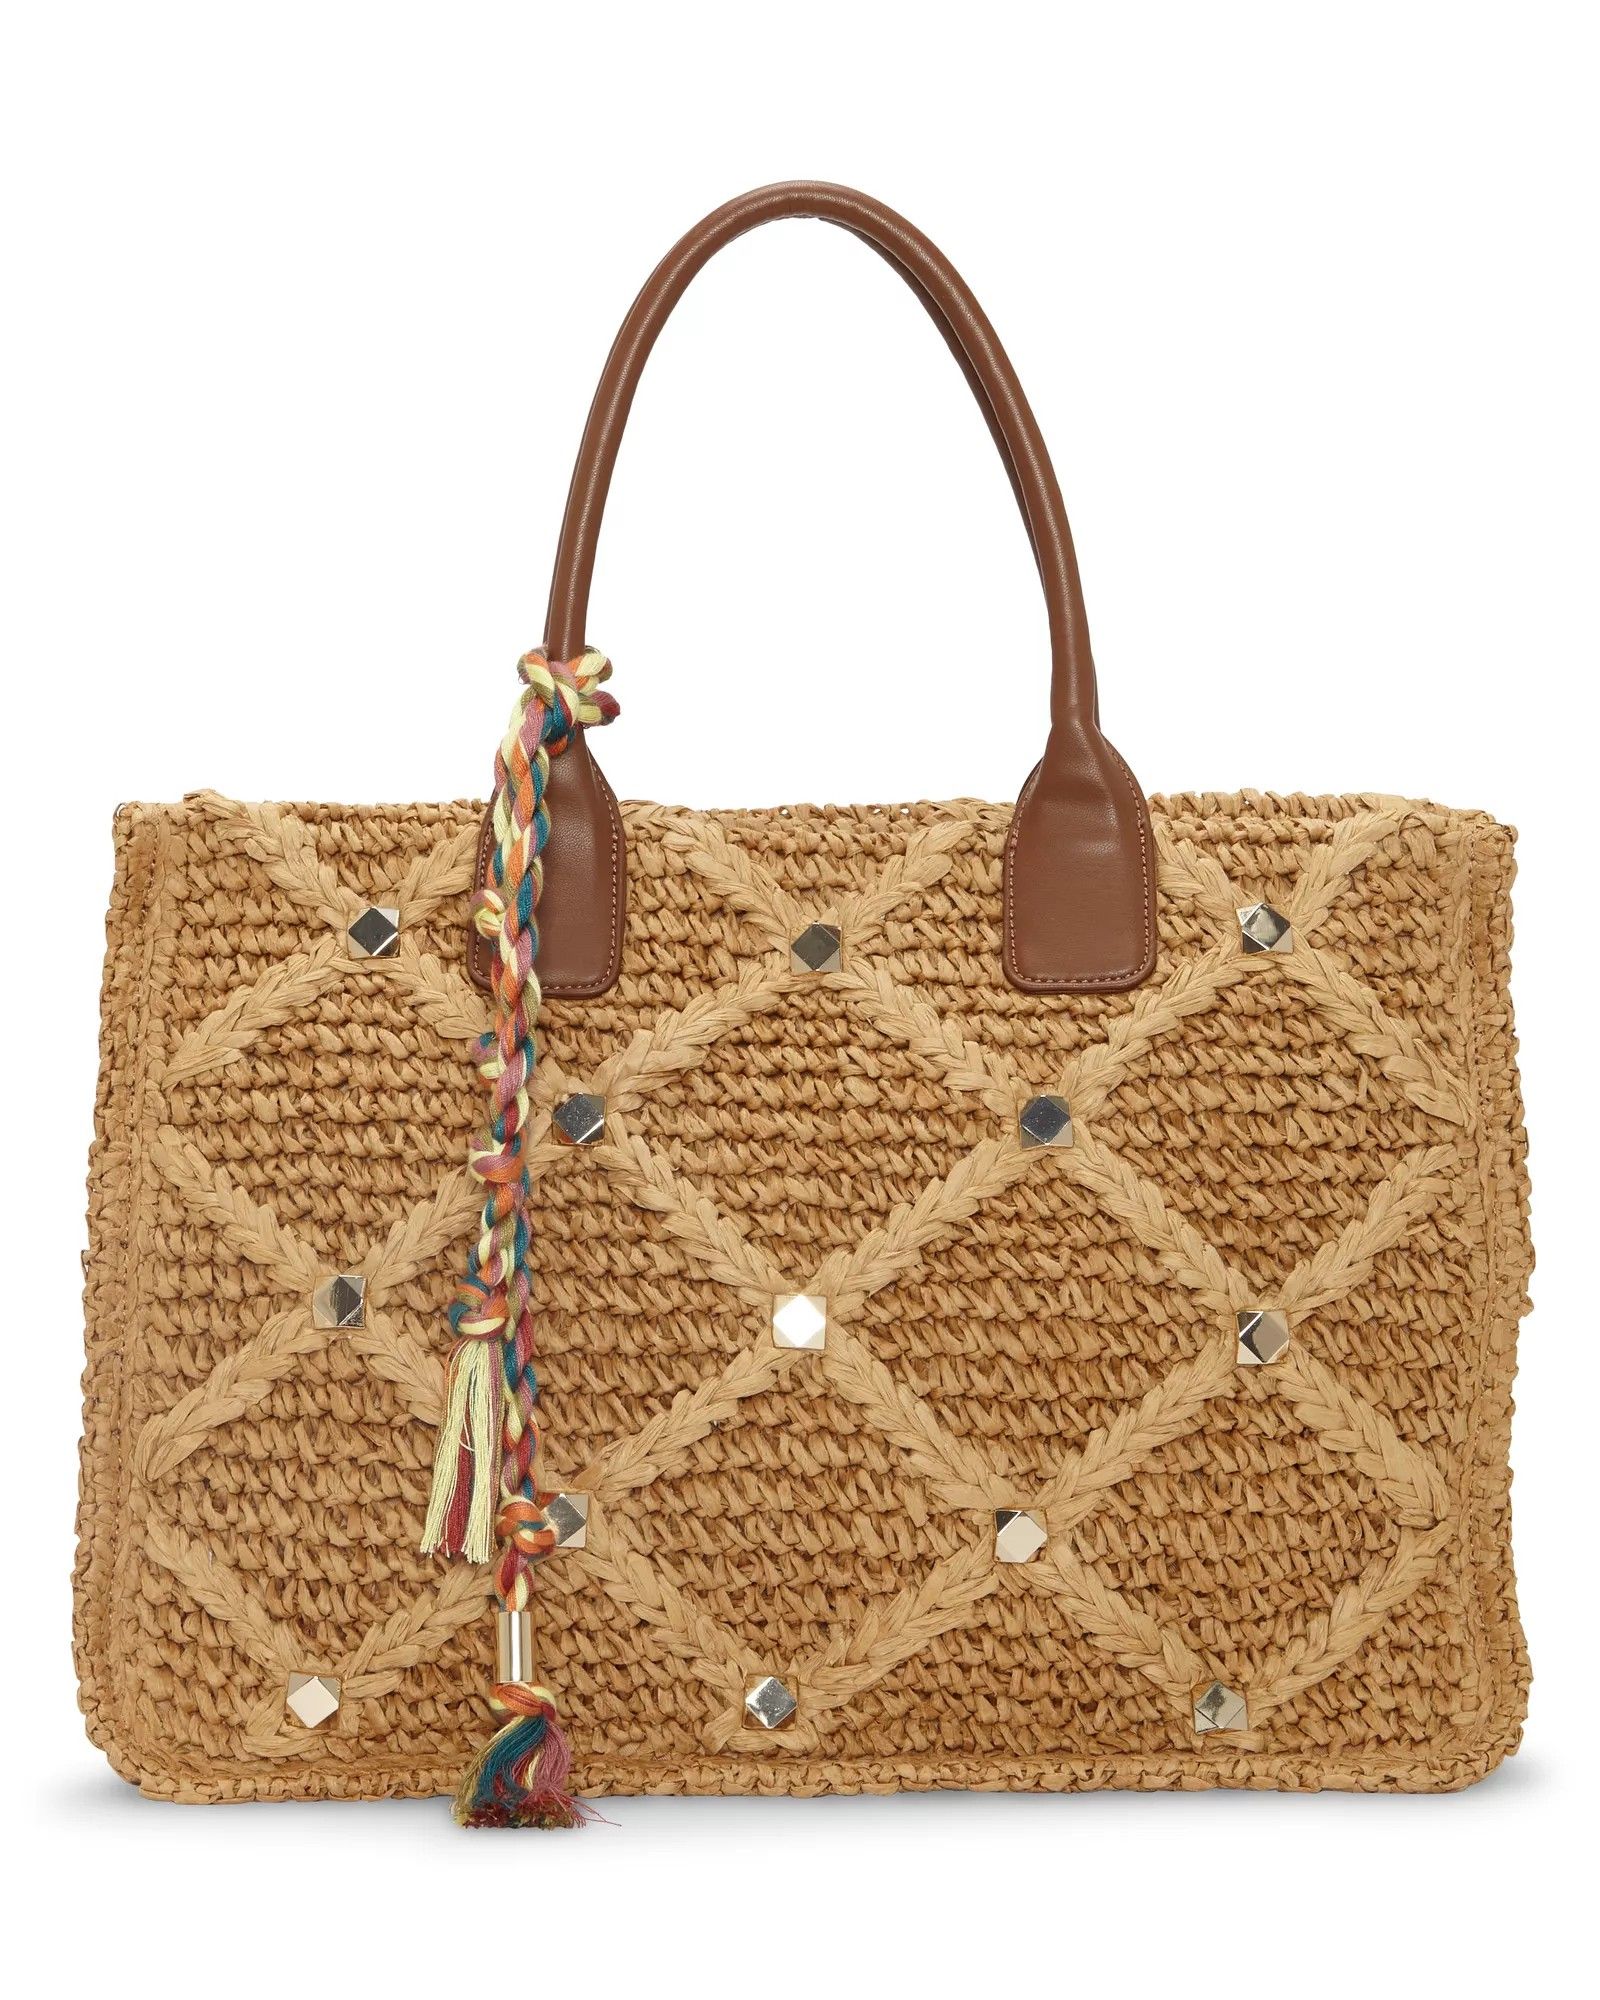 Vince Camuto Orla Straw Tote | Vince Camuto